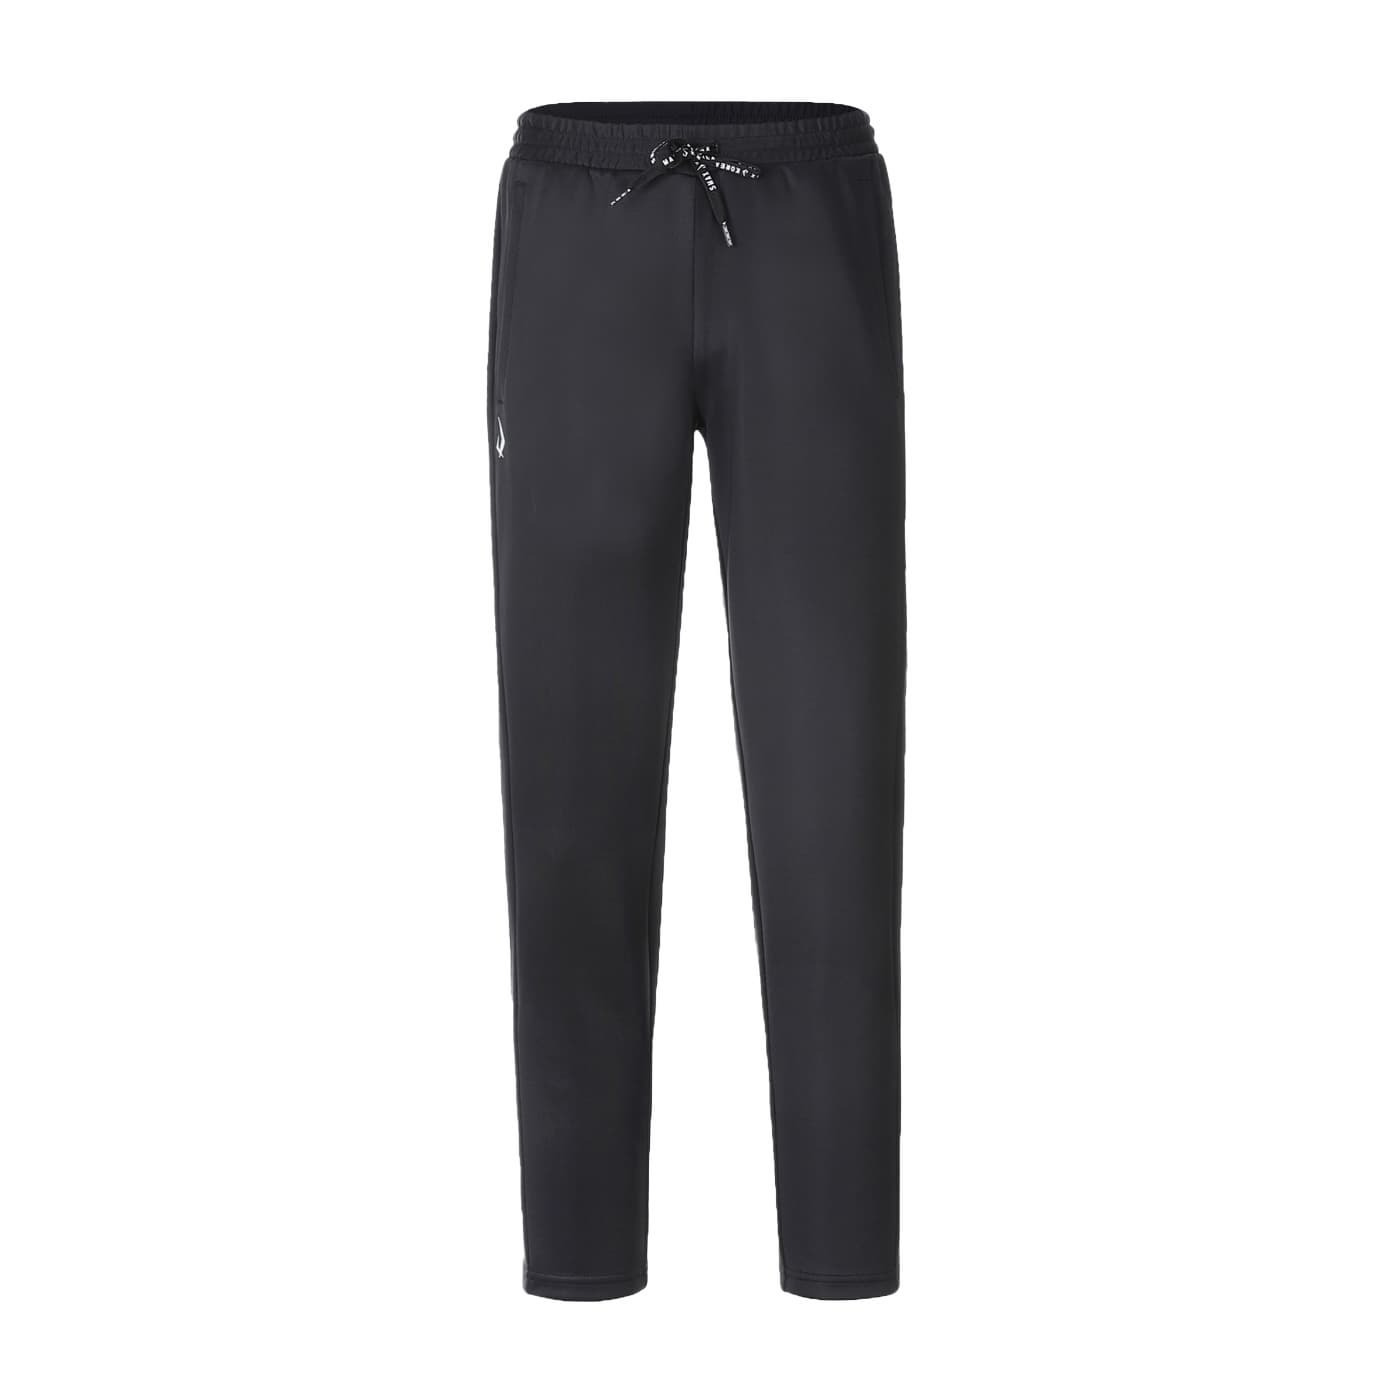 Long pants for sports using the finest spandex fabric